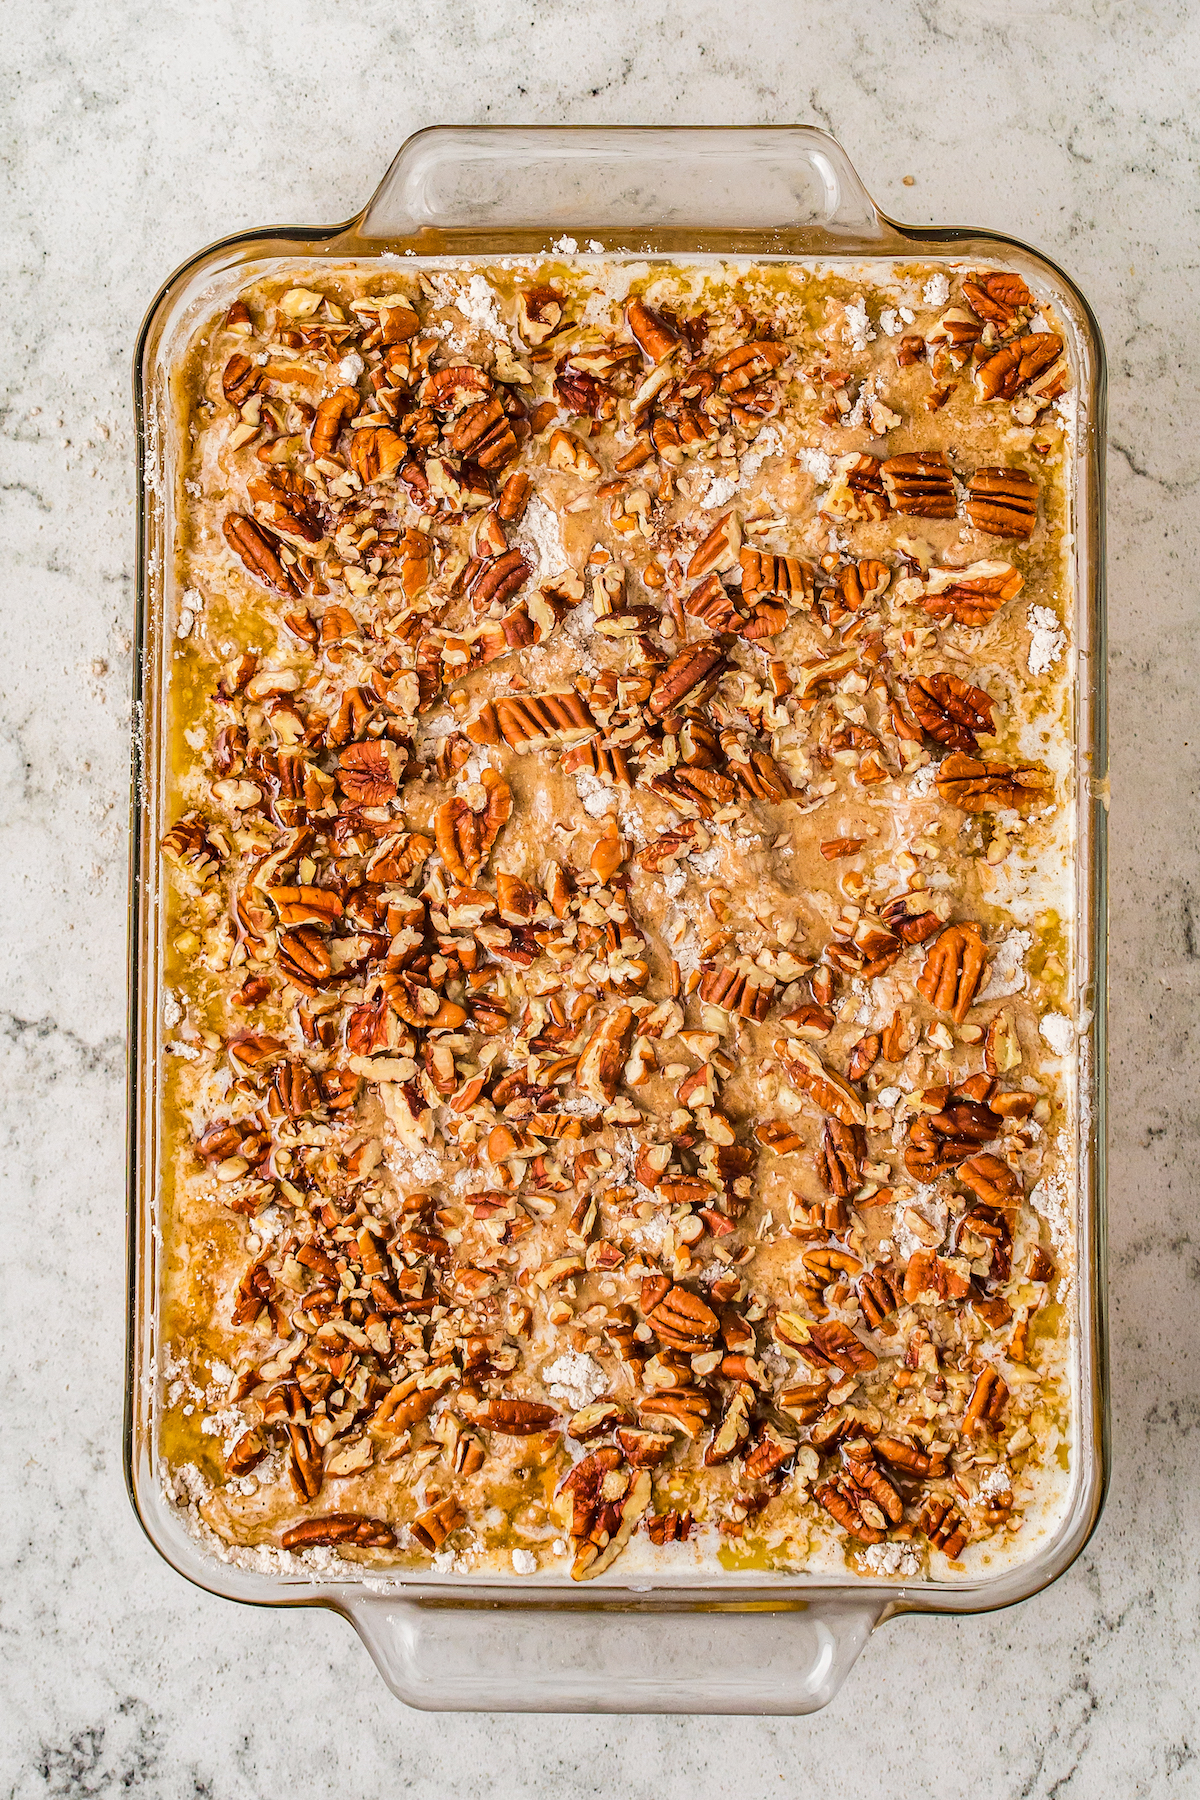 An unbaked dump cake topped with nuts and toffee bits.